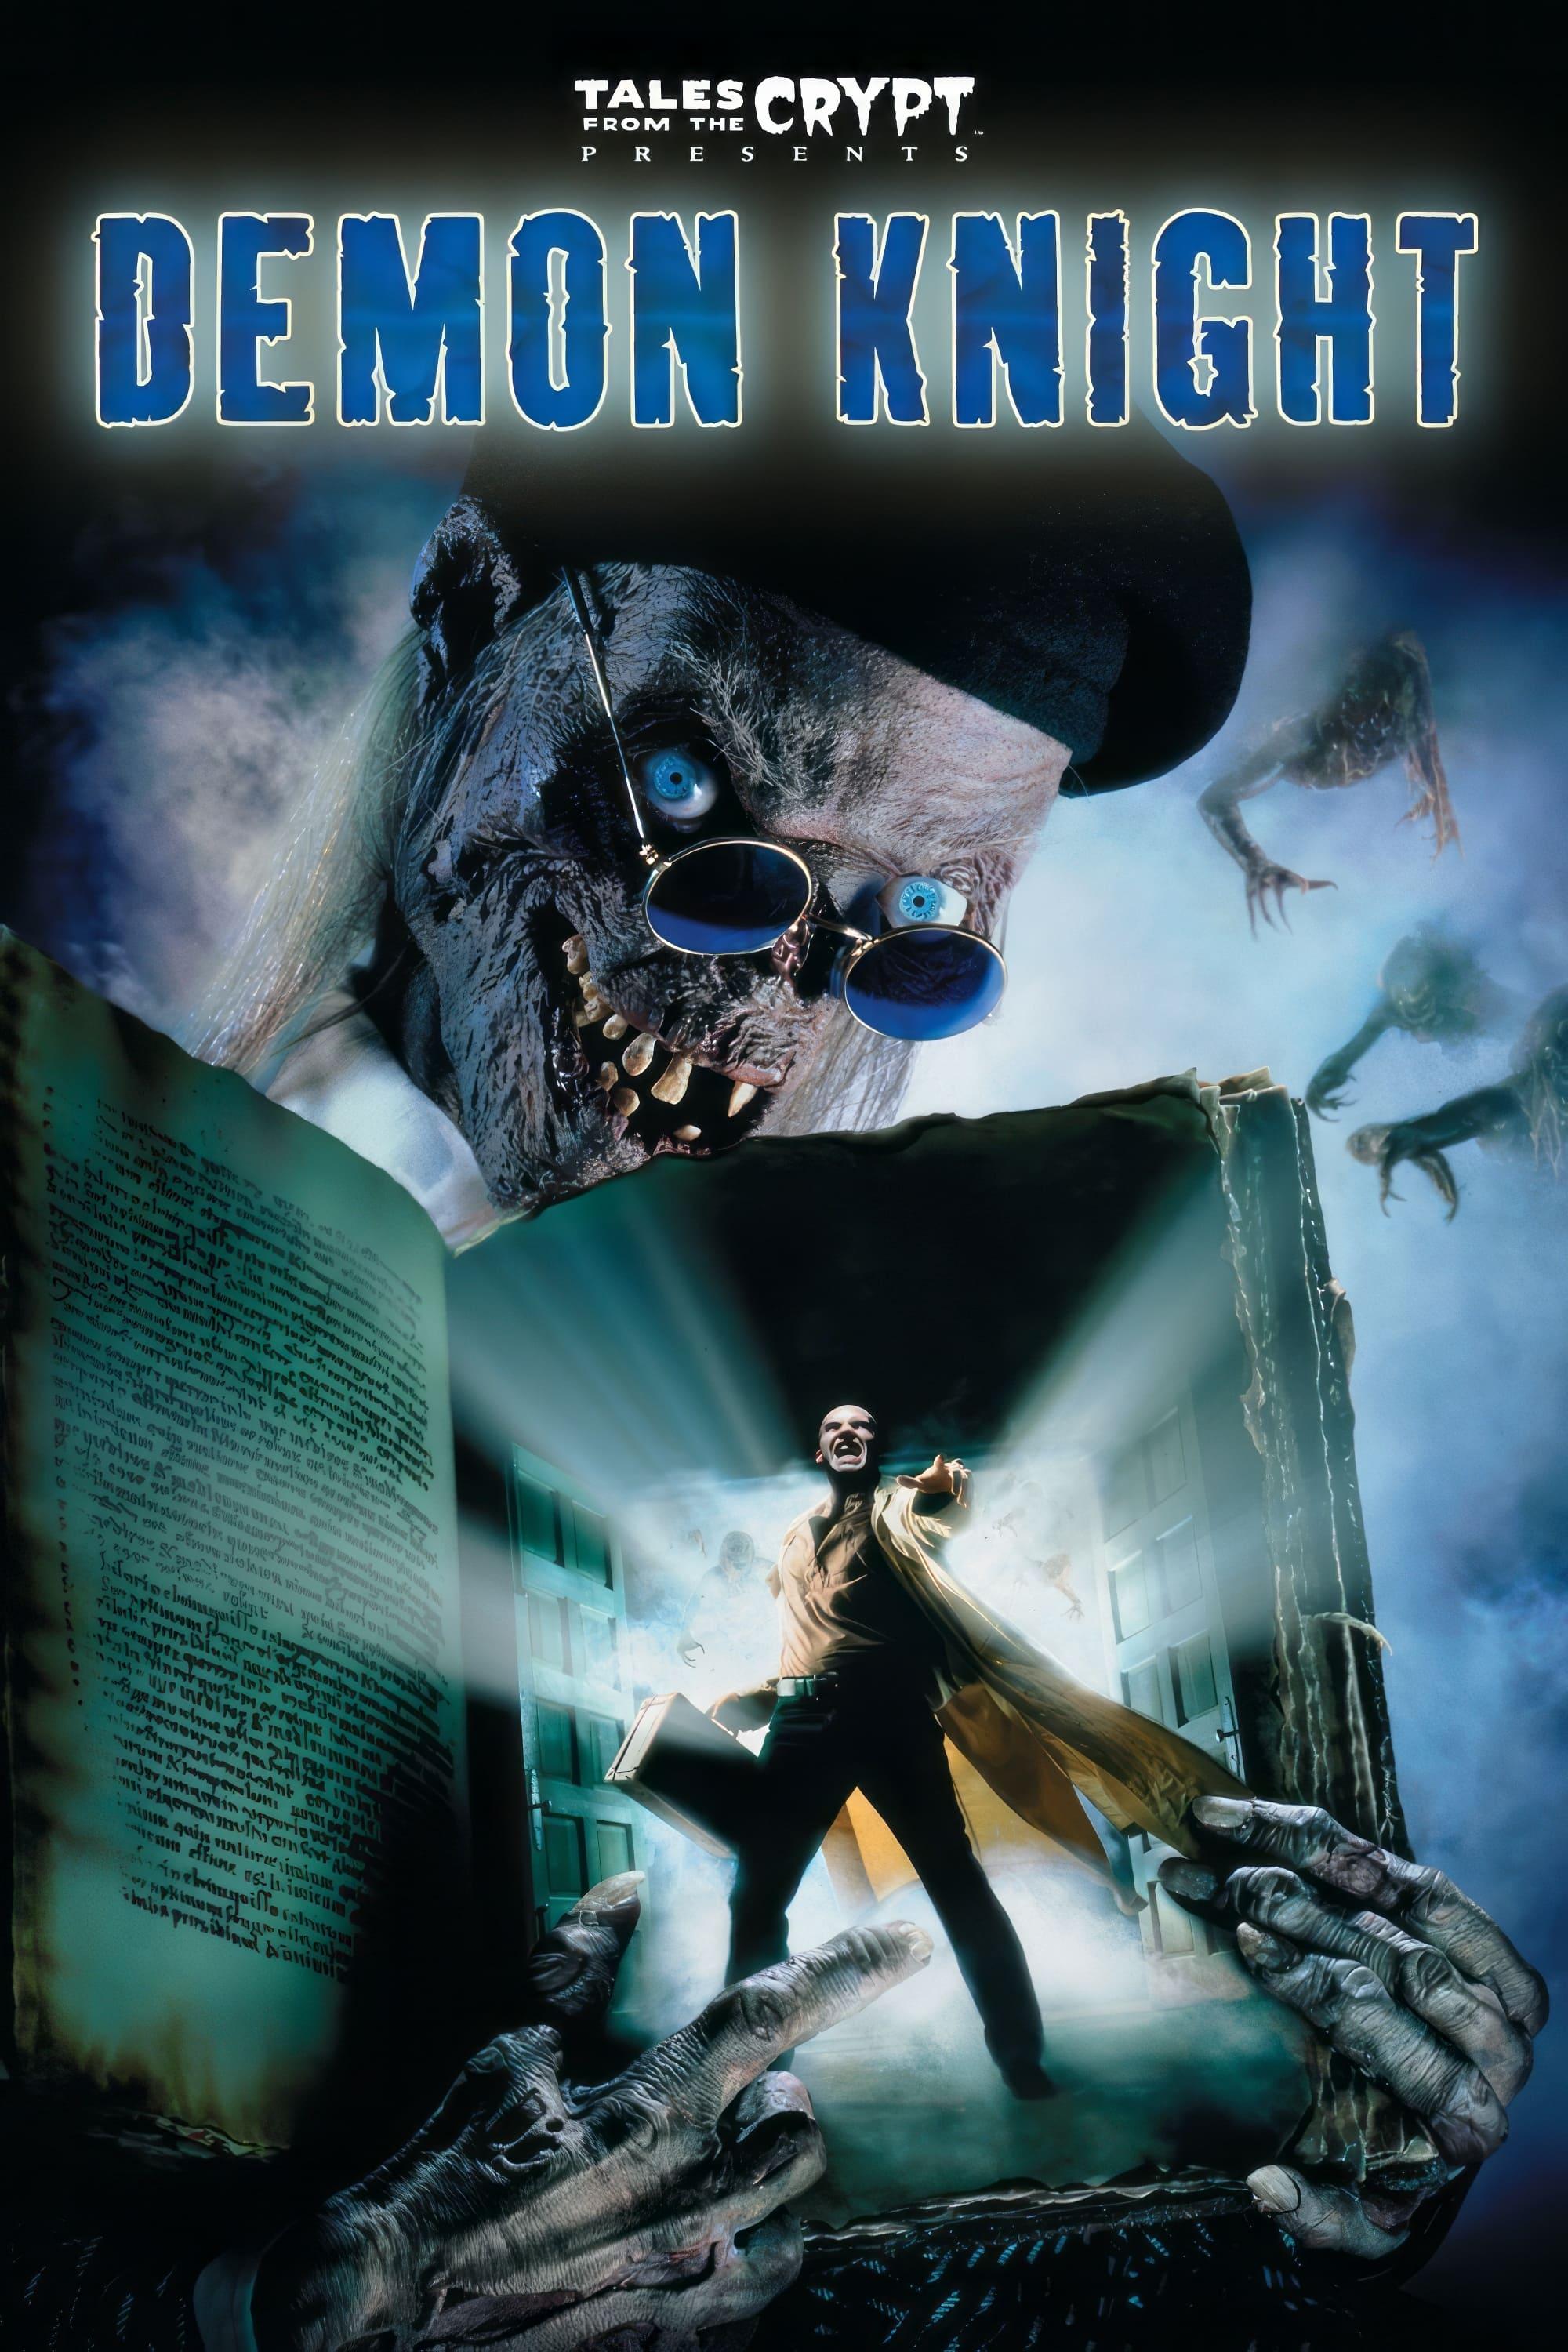 Tales from the Crypt: Demon Knight poster